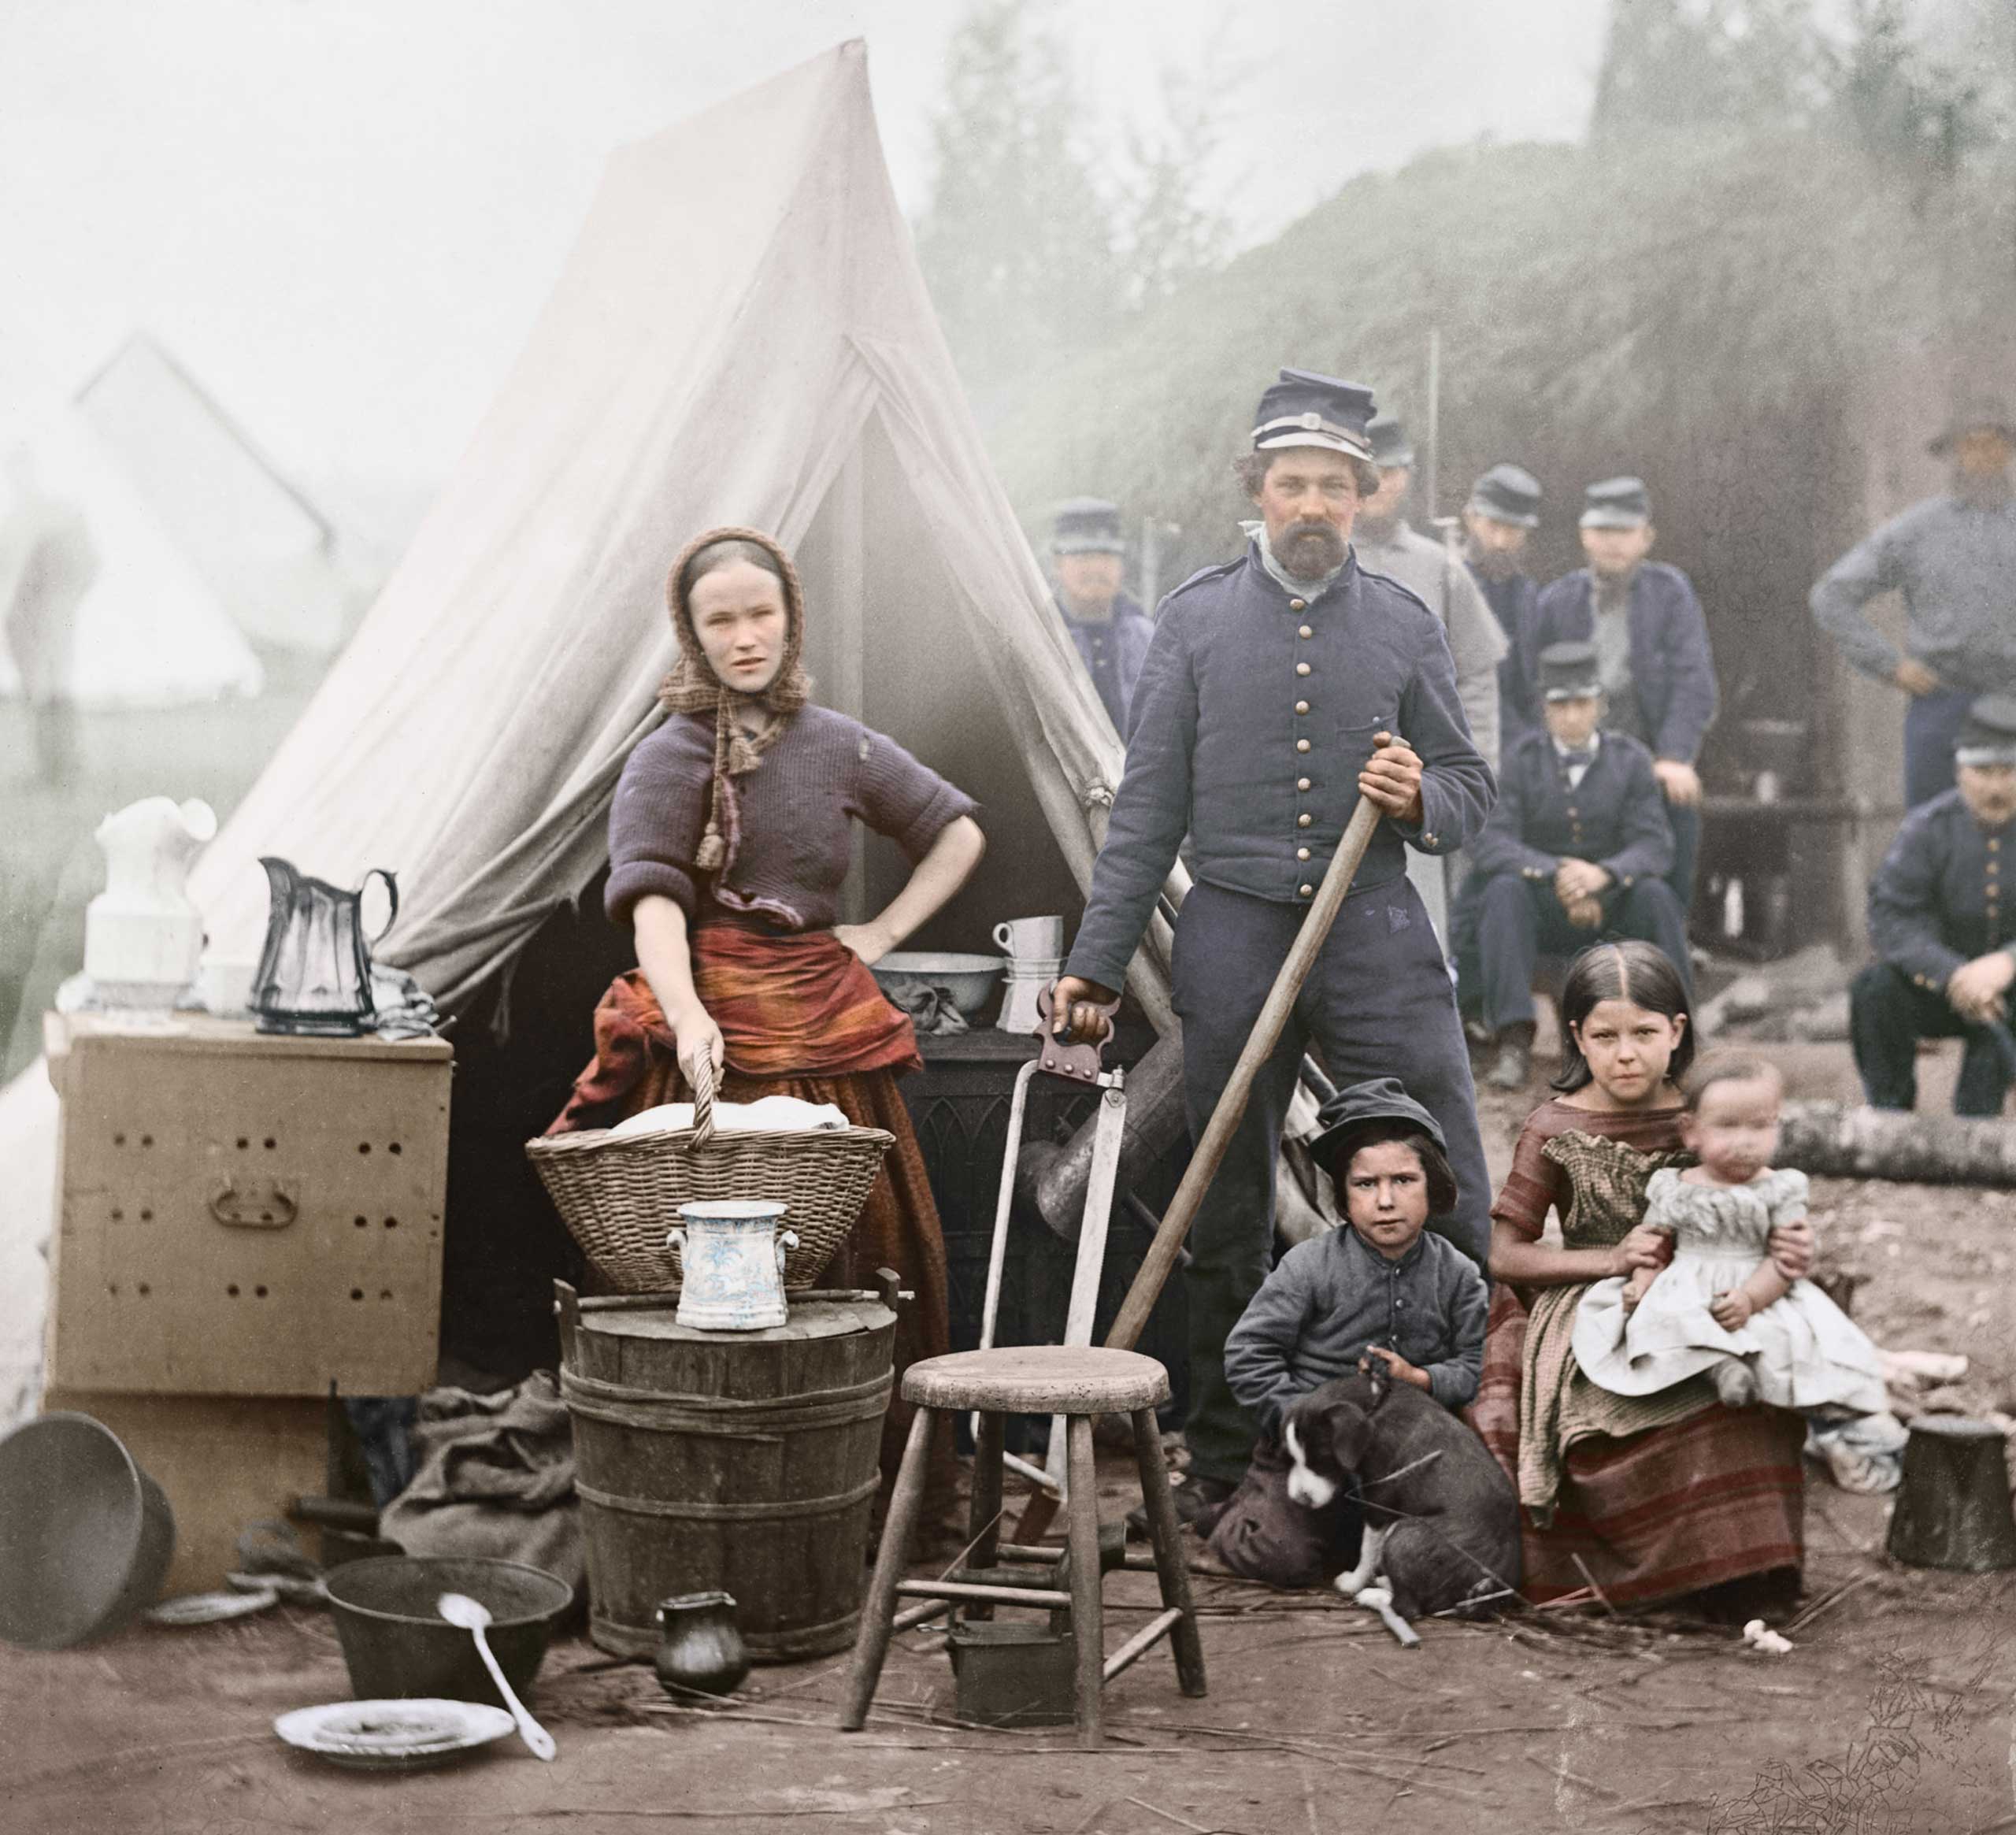 Washington, District of Columbia. Tent life of the 31st Penn. Inf. at Queen's farm, vicinity of Fort Slocum in Washington, DC, 1861.